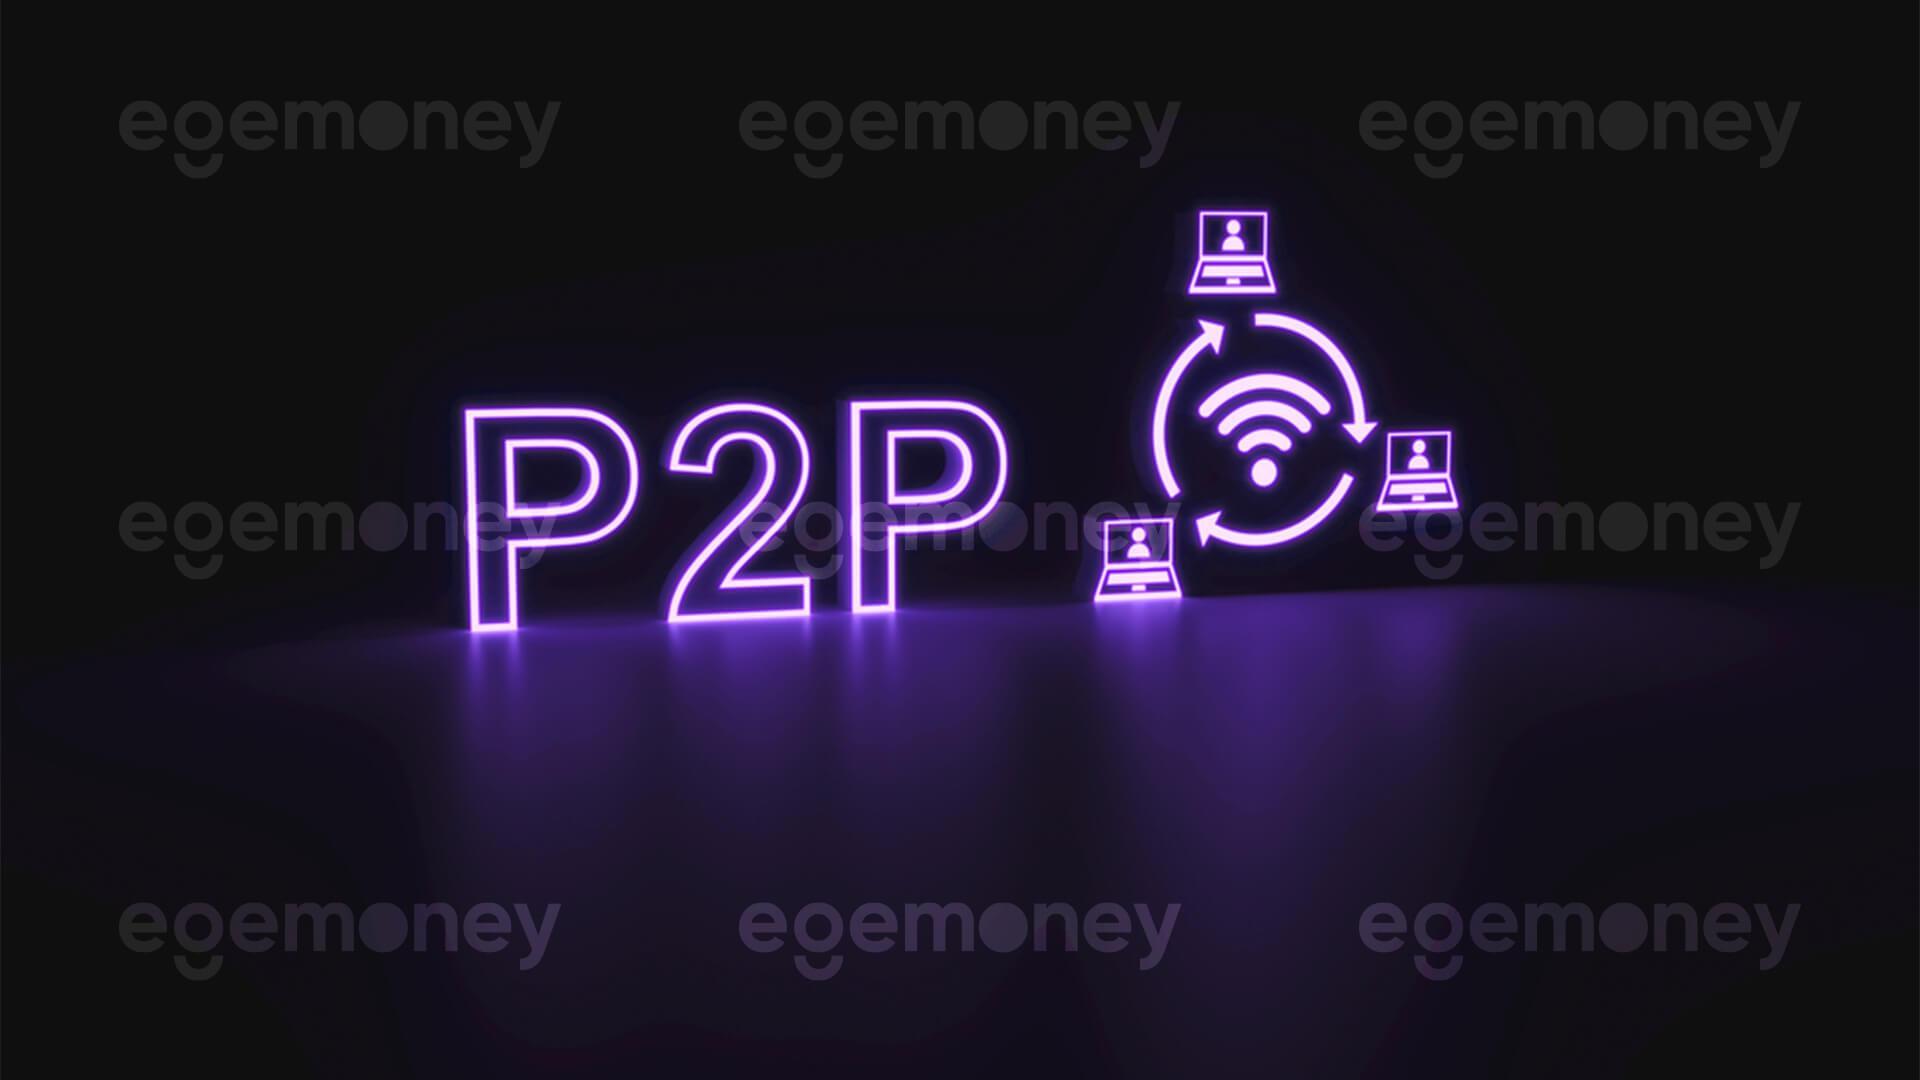 How to Share P2P Ads on Social Media?